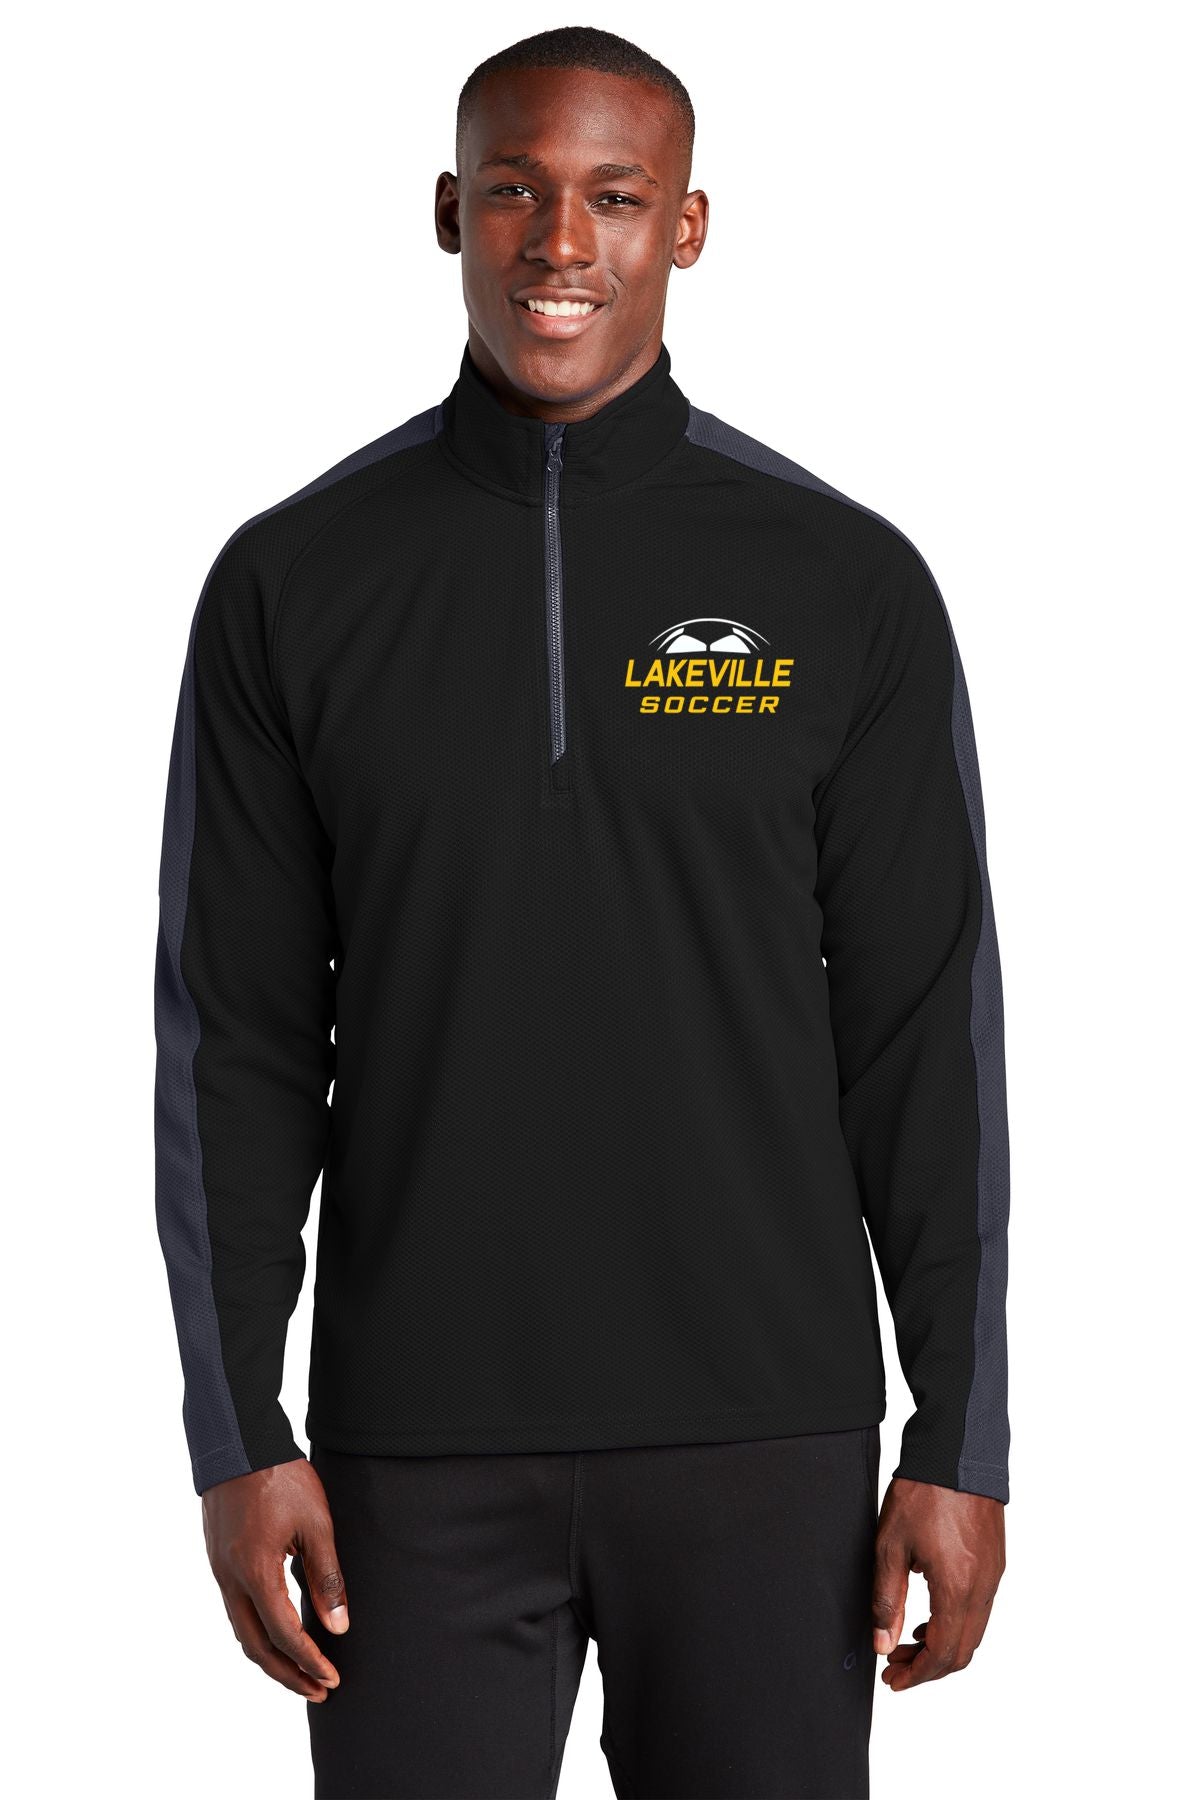 Lakeville Soccer Sport-Wick Textured Colorblock 1/4-Zip Pullover